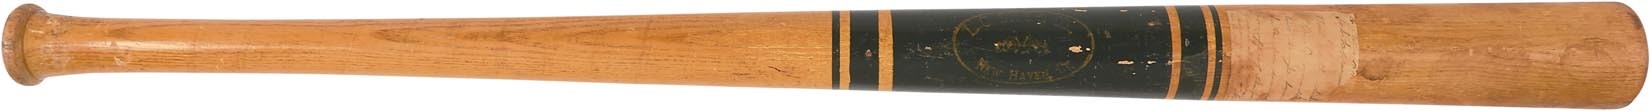 1880s L.C. Dole Ring Bat w/Earliest Known Use of the Term "Memorabilia" (Samuel M. Chase Collection)